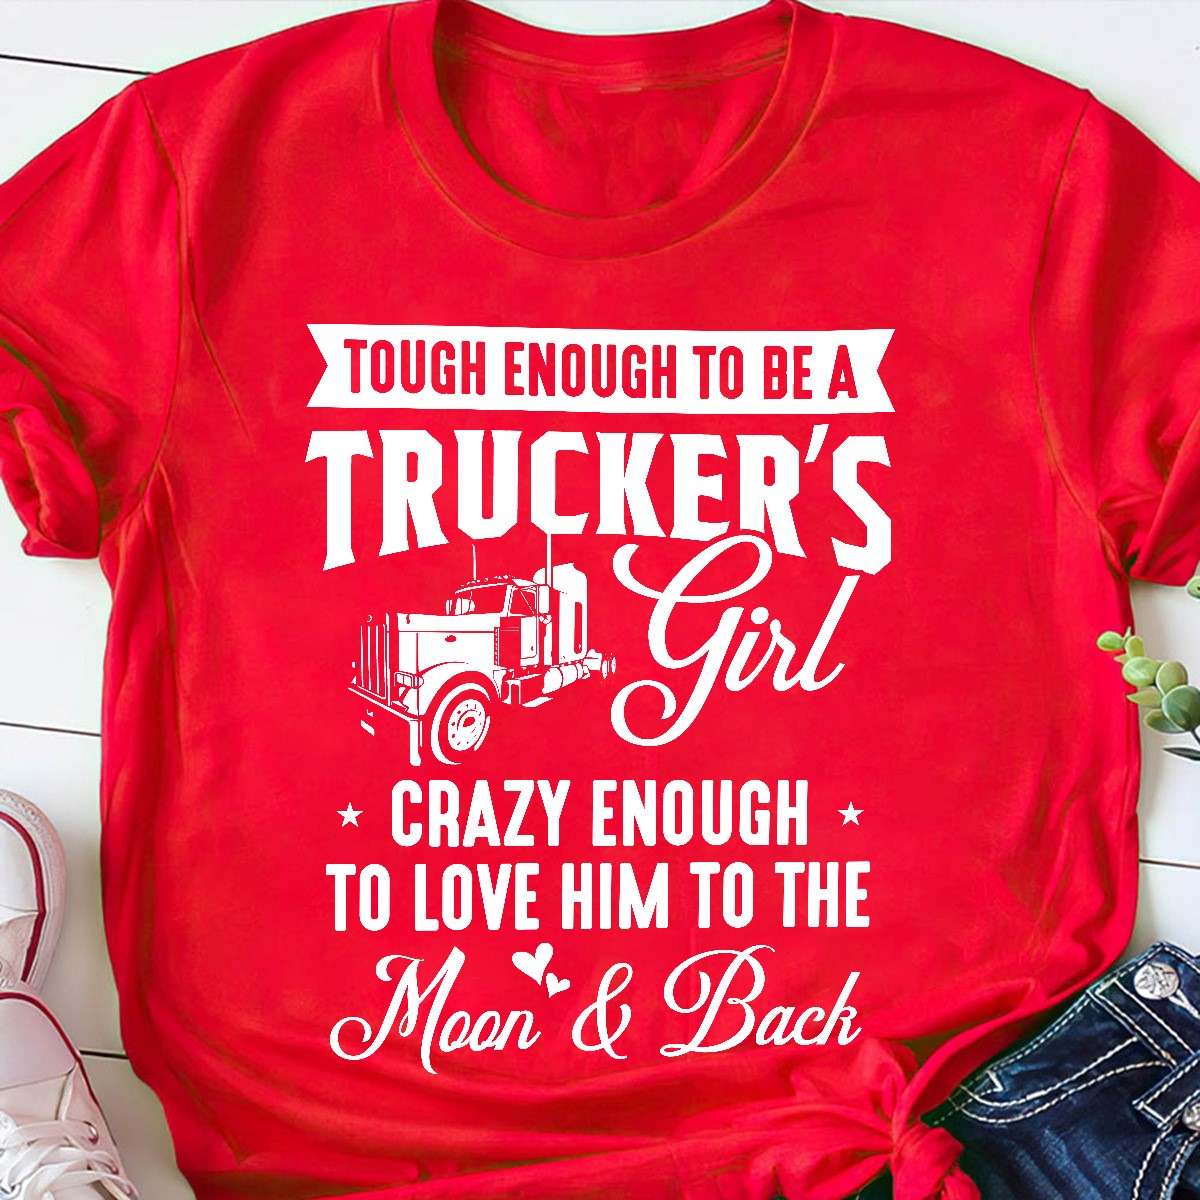 Trucker's Girl - Tough enough to be a trucker's girl crazy enough to love him to the moom & back